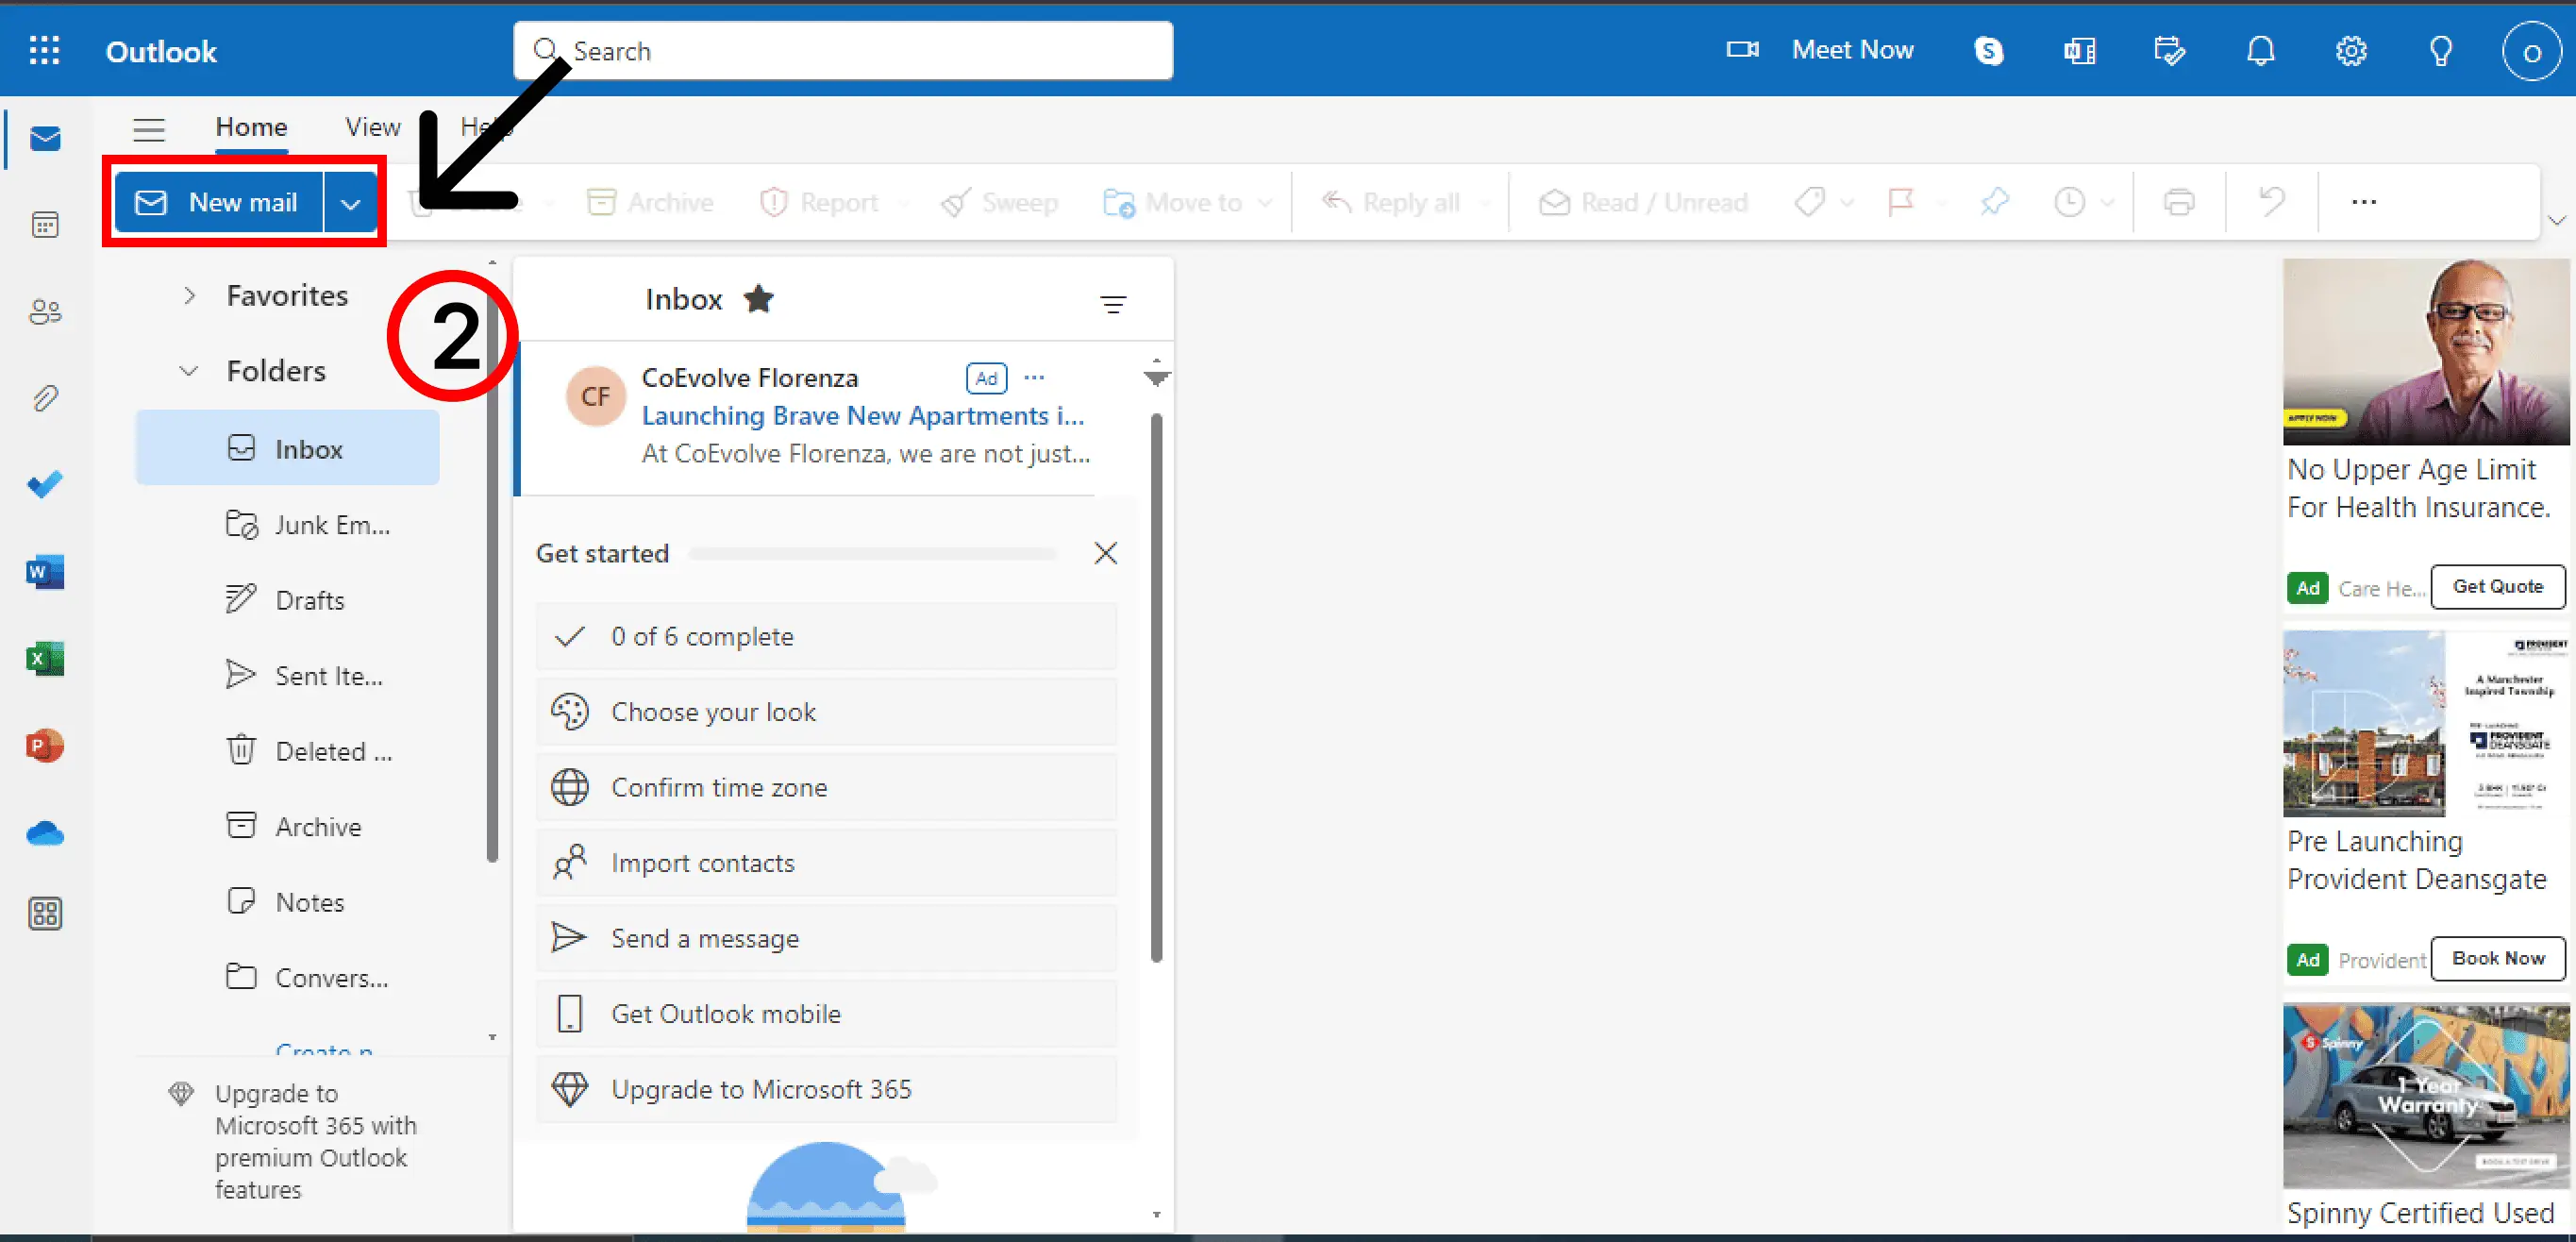 How To Create An Email Template in Outlook - Step 2 - NeoDove